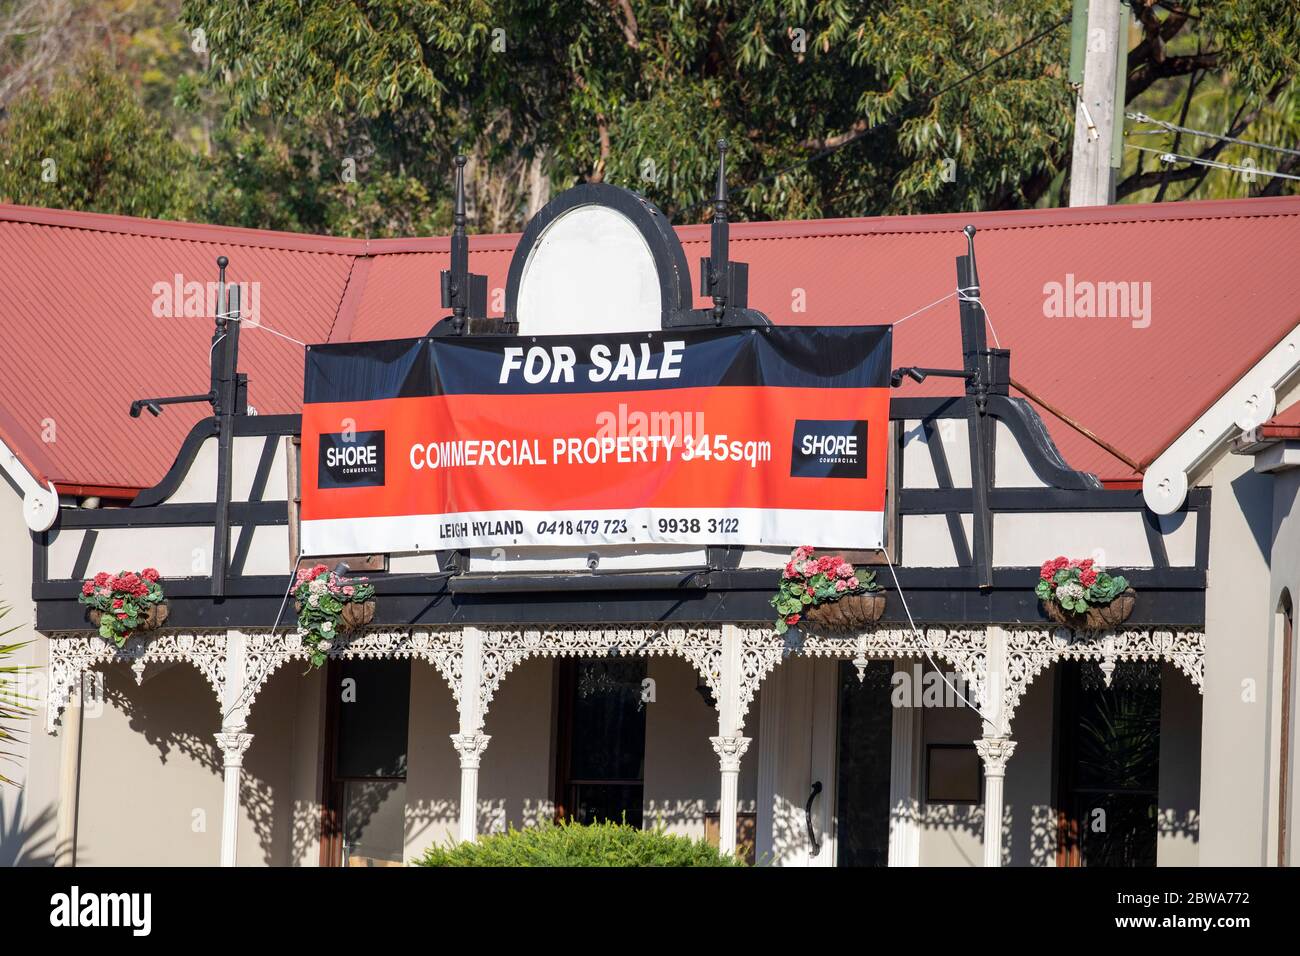 Commercial property for sale banner above a restaurant in Sydney,NSW,Australia Stock Photo